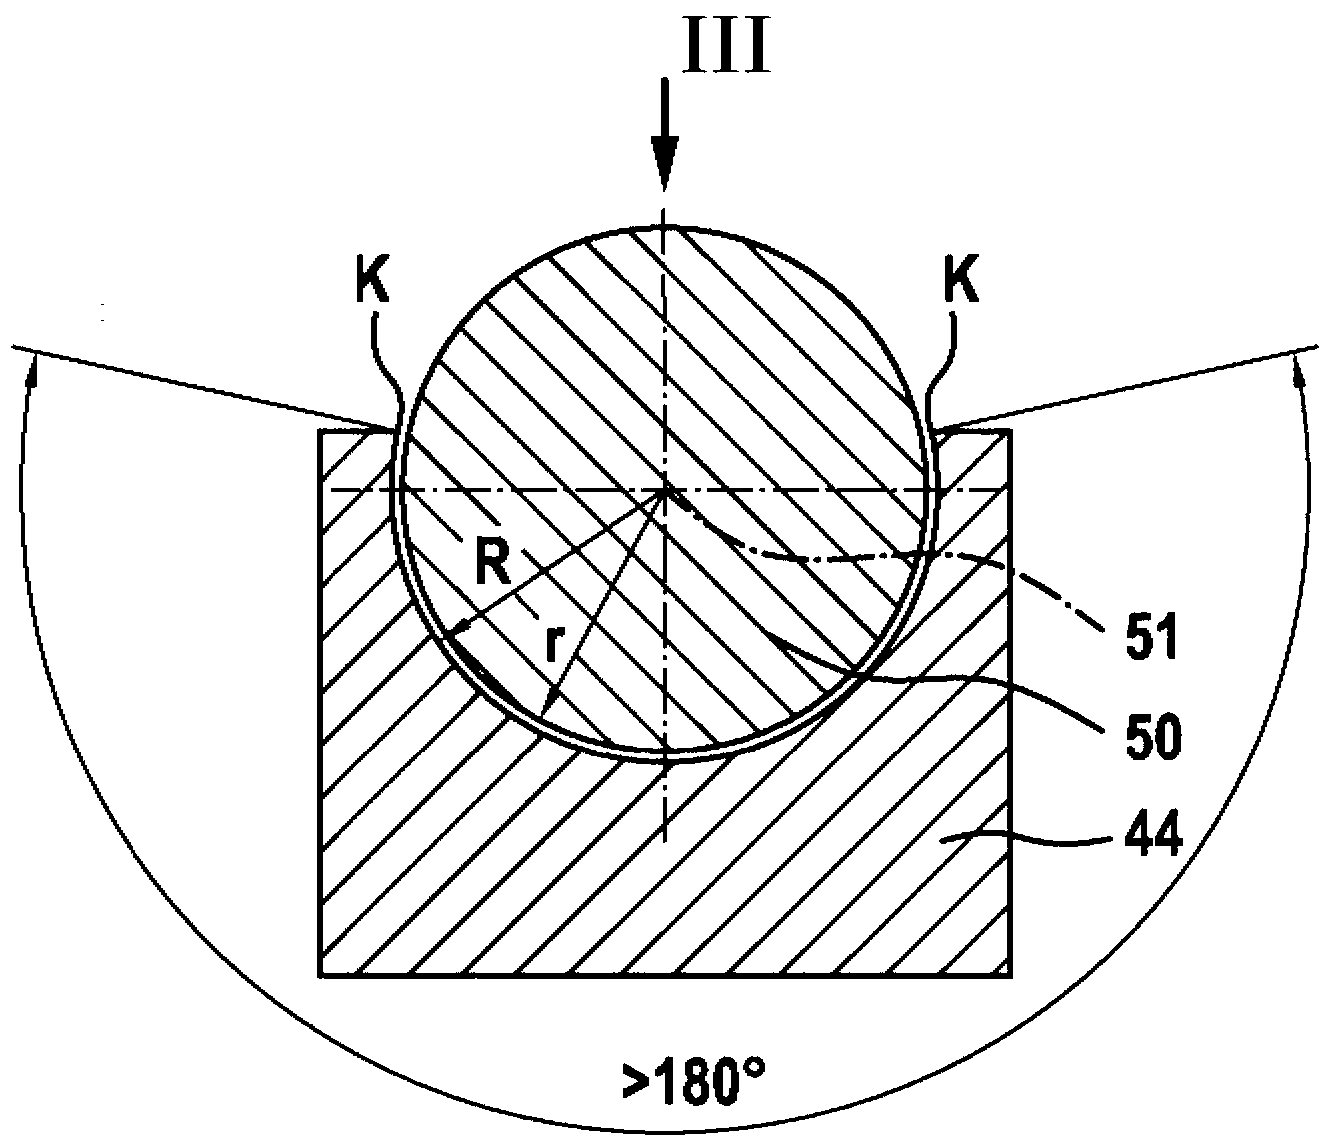 Bearing element having a roller rotatably mounted therein, in particular in the drive of a pump piston of a high-pressure fuel pump